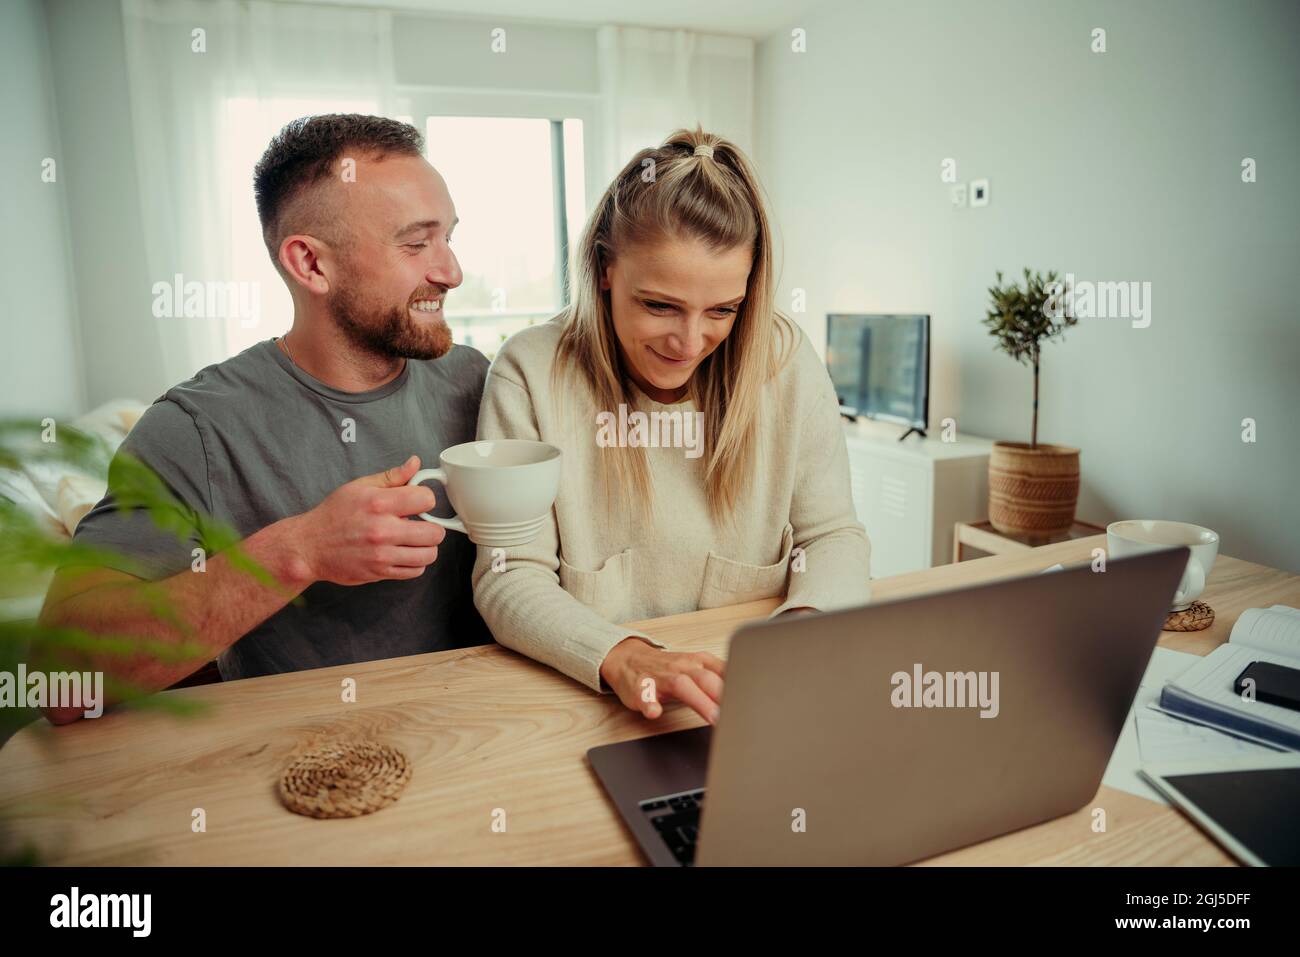 Cute caucasian couple sitting at kitchen table typing on laptop Stock Photo